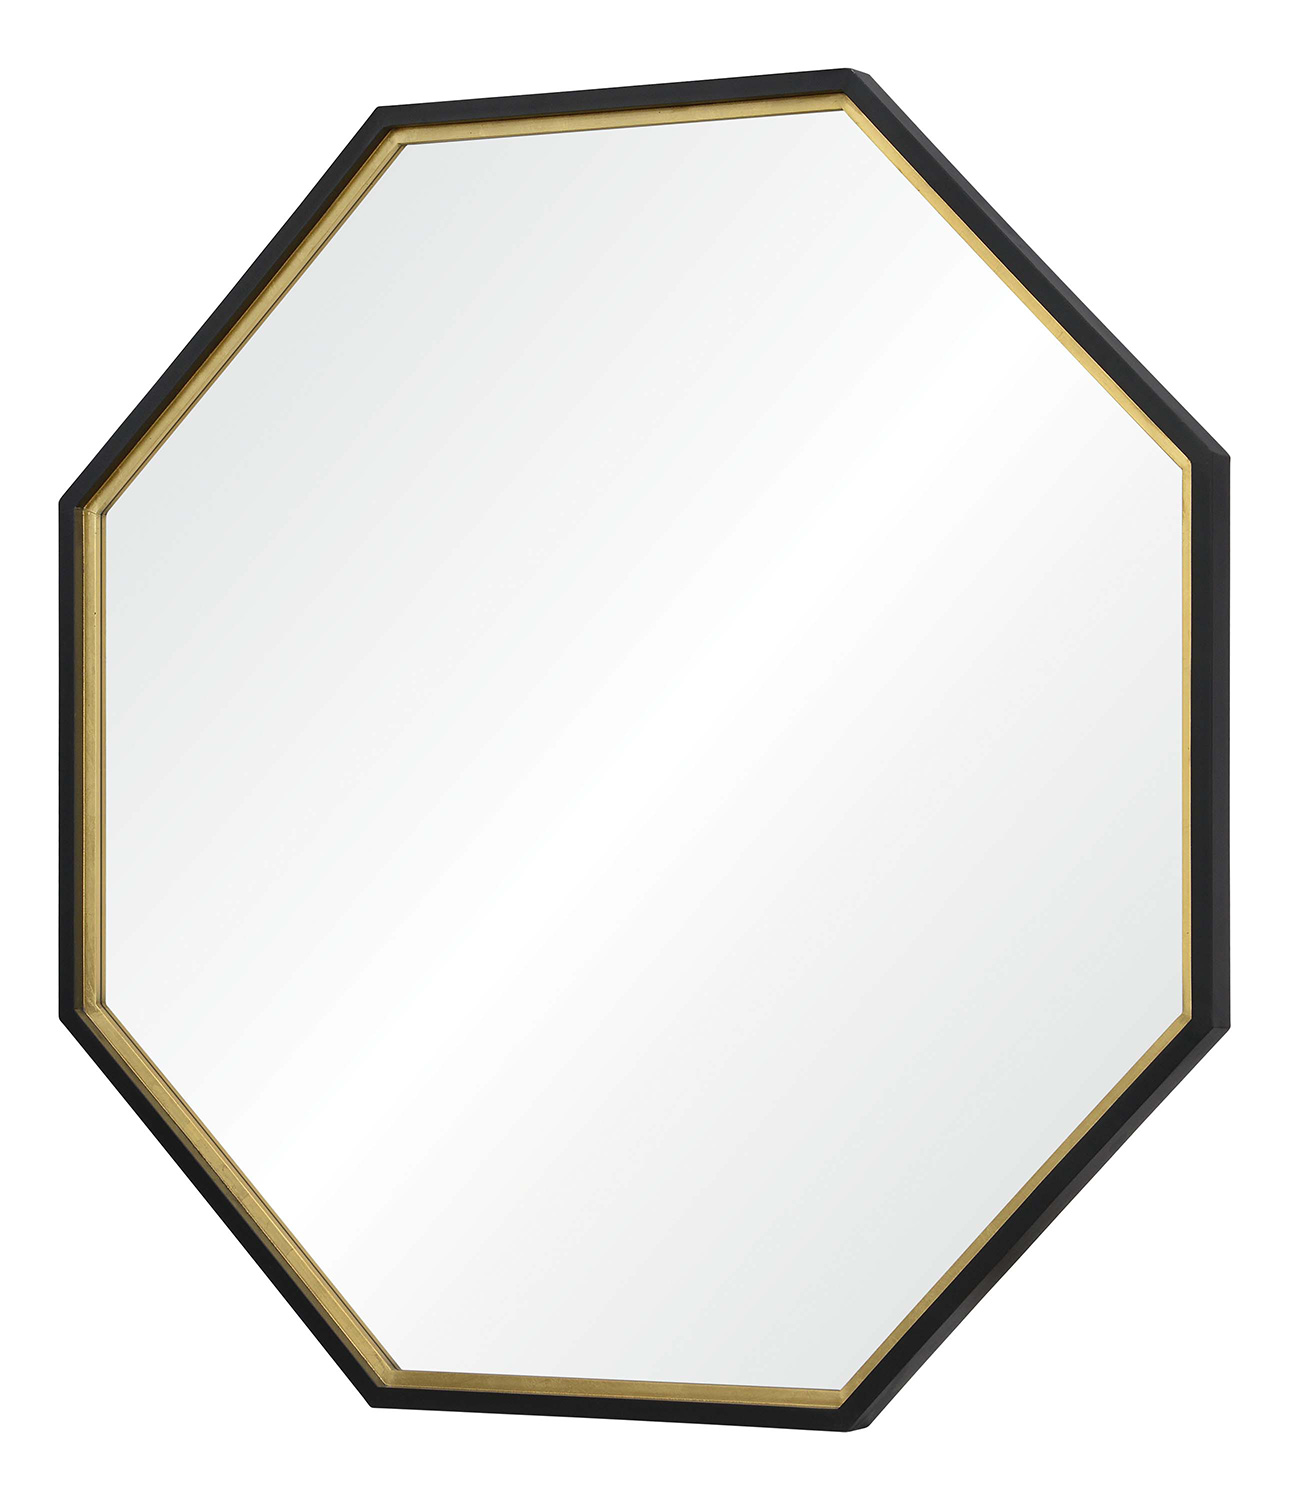 Ren-Wil Octo Octagon Mirror - Black Painted And Gold Leaf